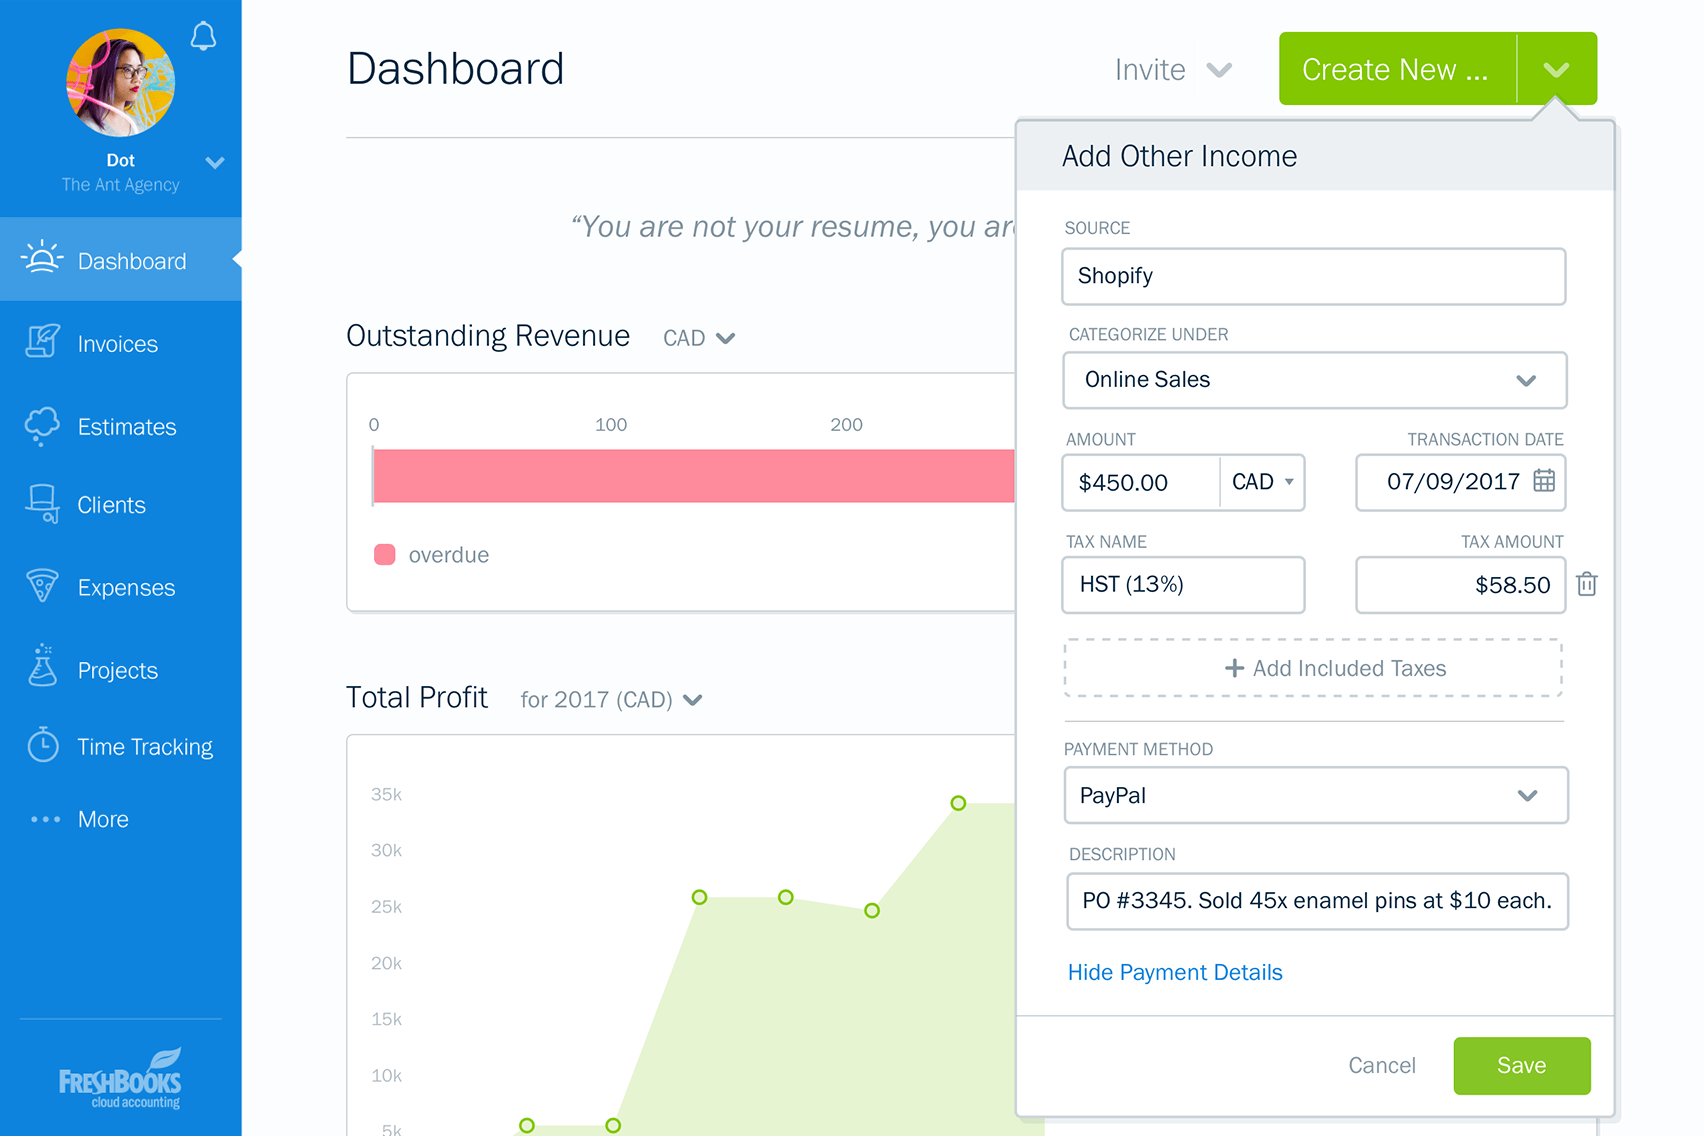 FreshBooks: adding other income